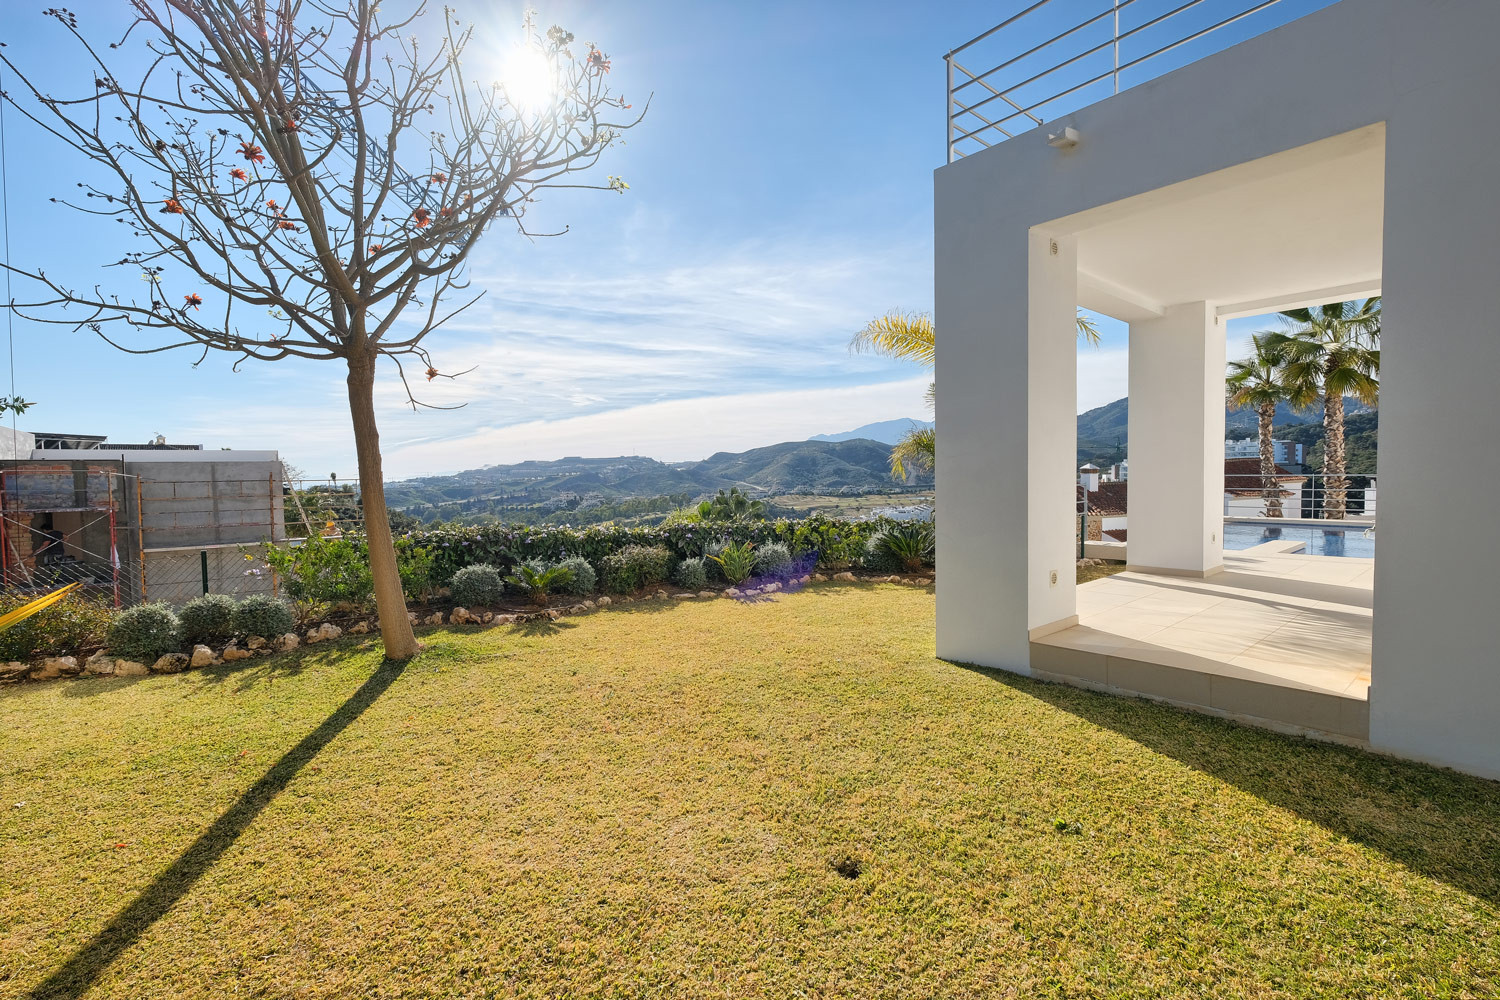 Newly built, contemporary, 5 bedroom quality villa in Puerto del Capitan, Benahavis. South/west facing with beautiful sea and mountain views